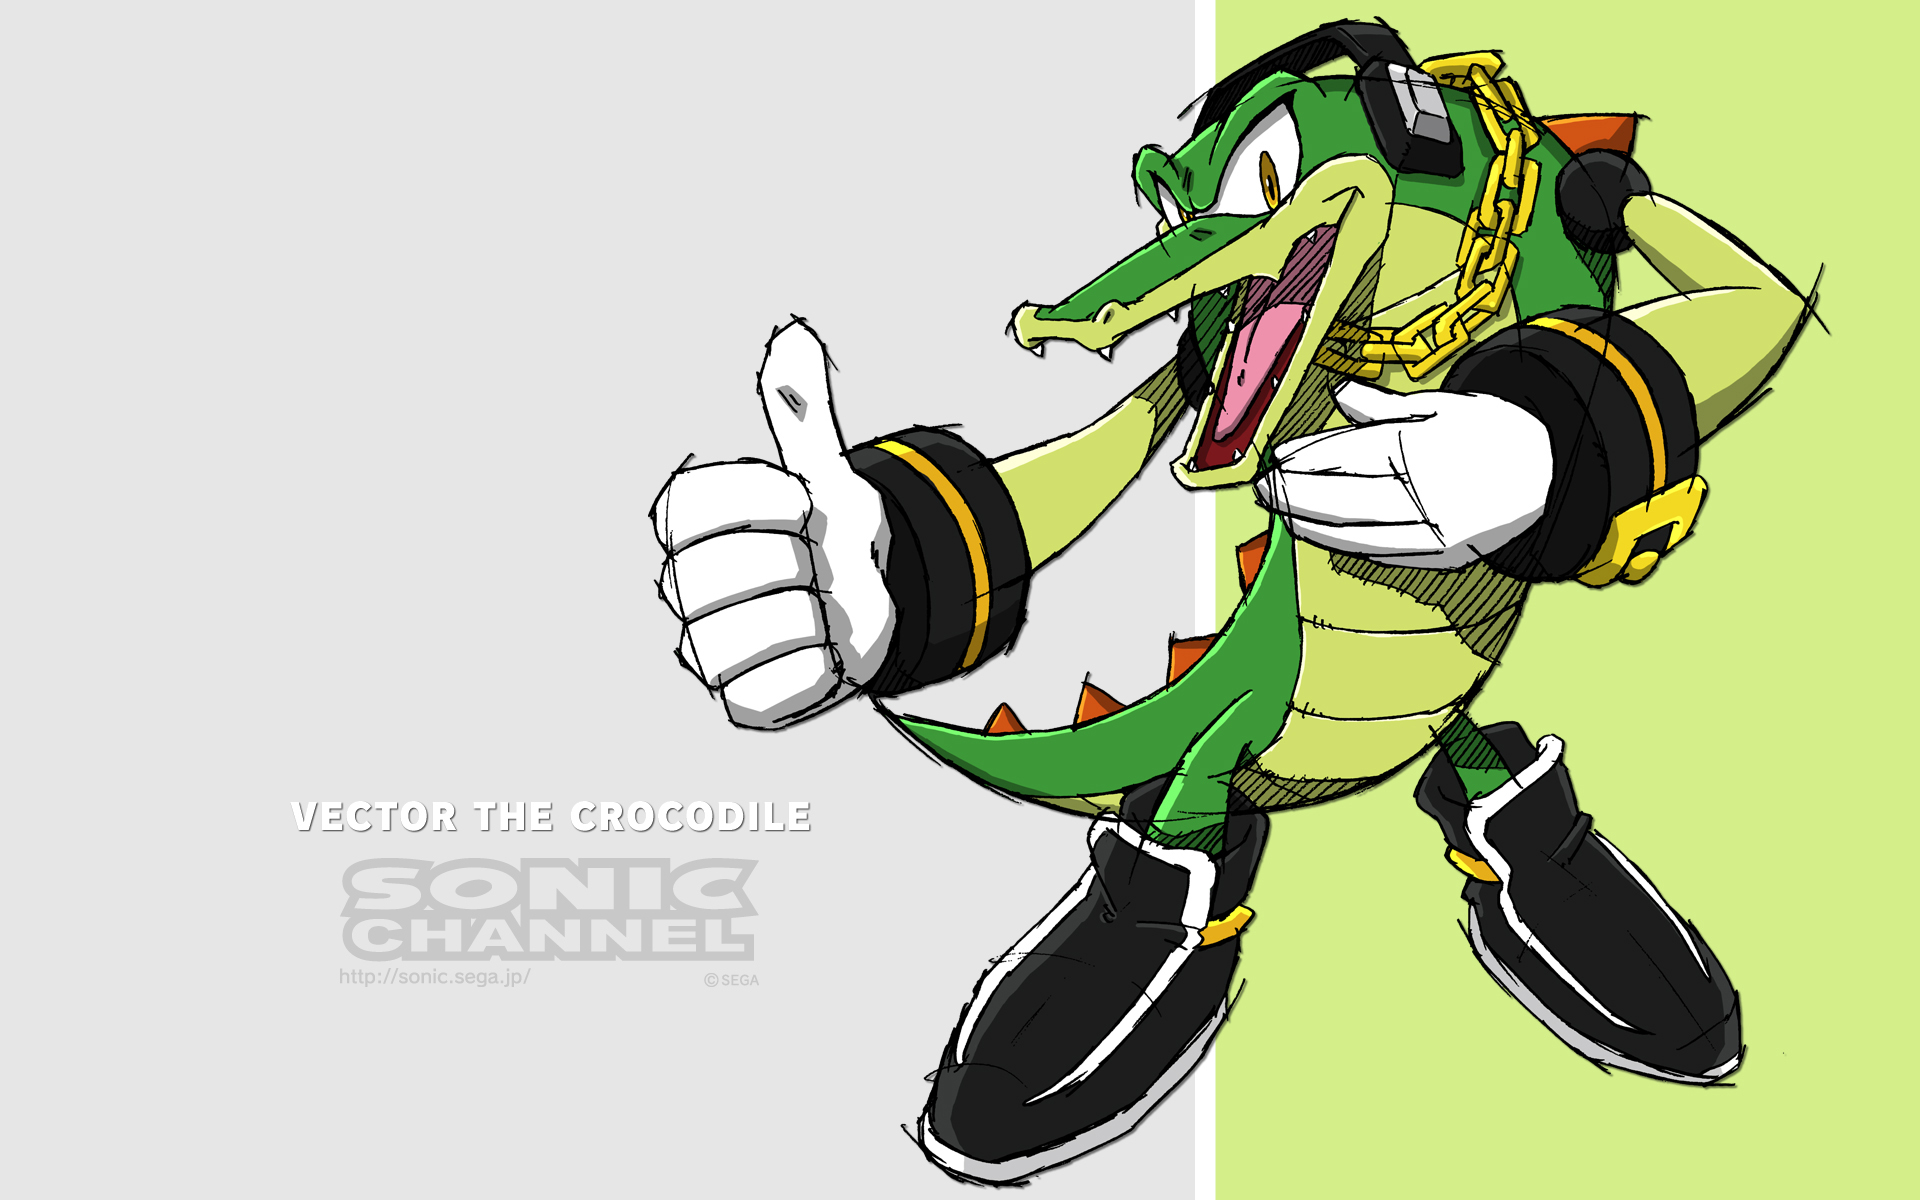 video game, sonic the hedgehog, sonic channel, vector the crocodile, sonic